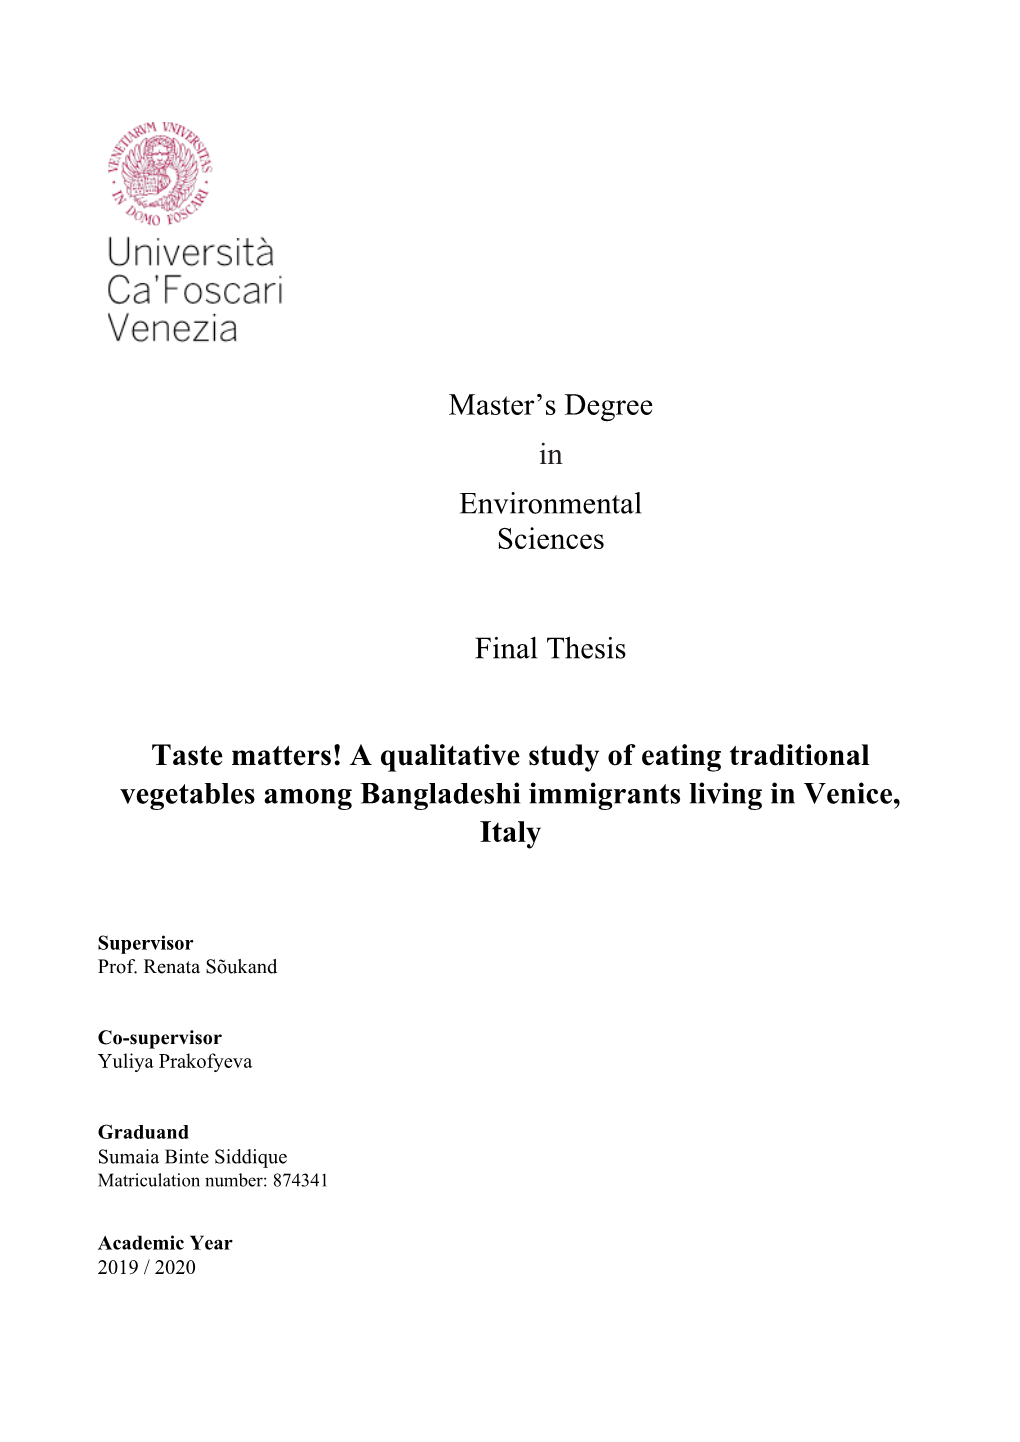 A Qualitative Study of Eating Traditional Vegetables Among Bangladeshi Immigrants Living in Venice, Italy